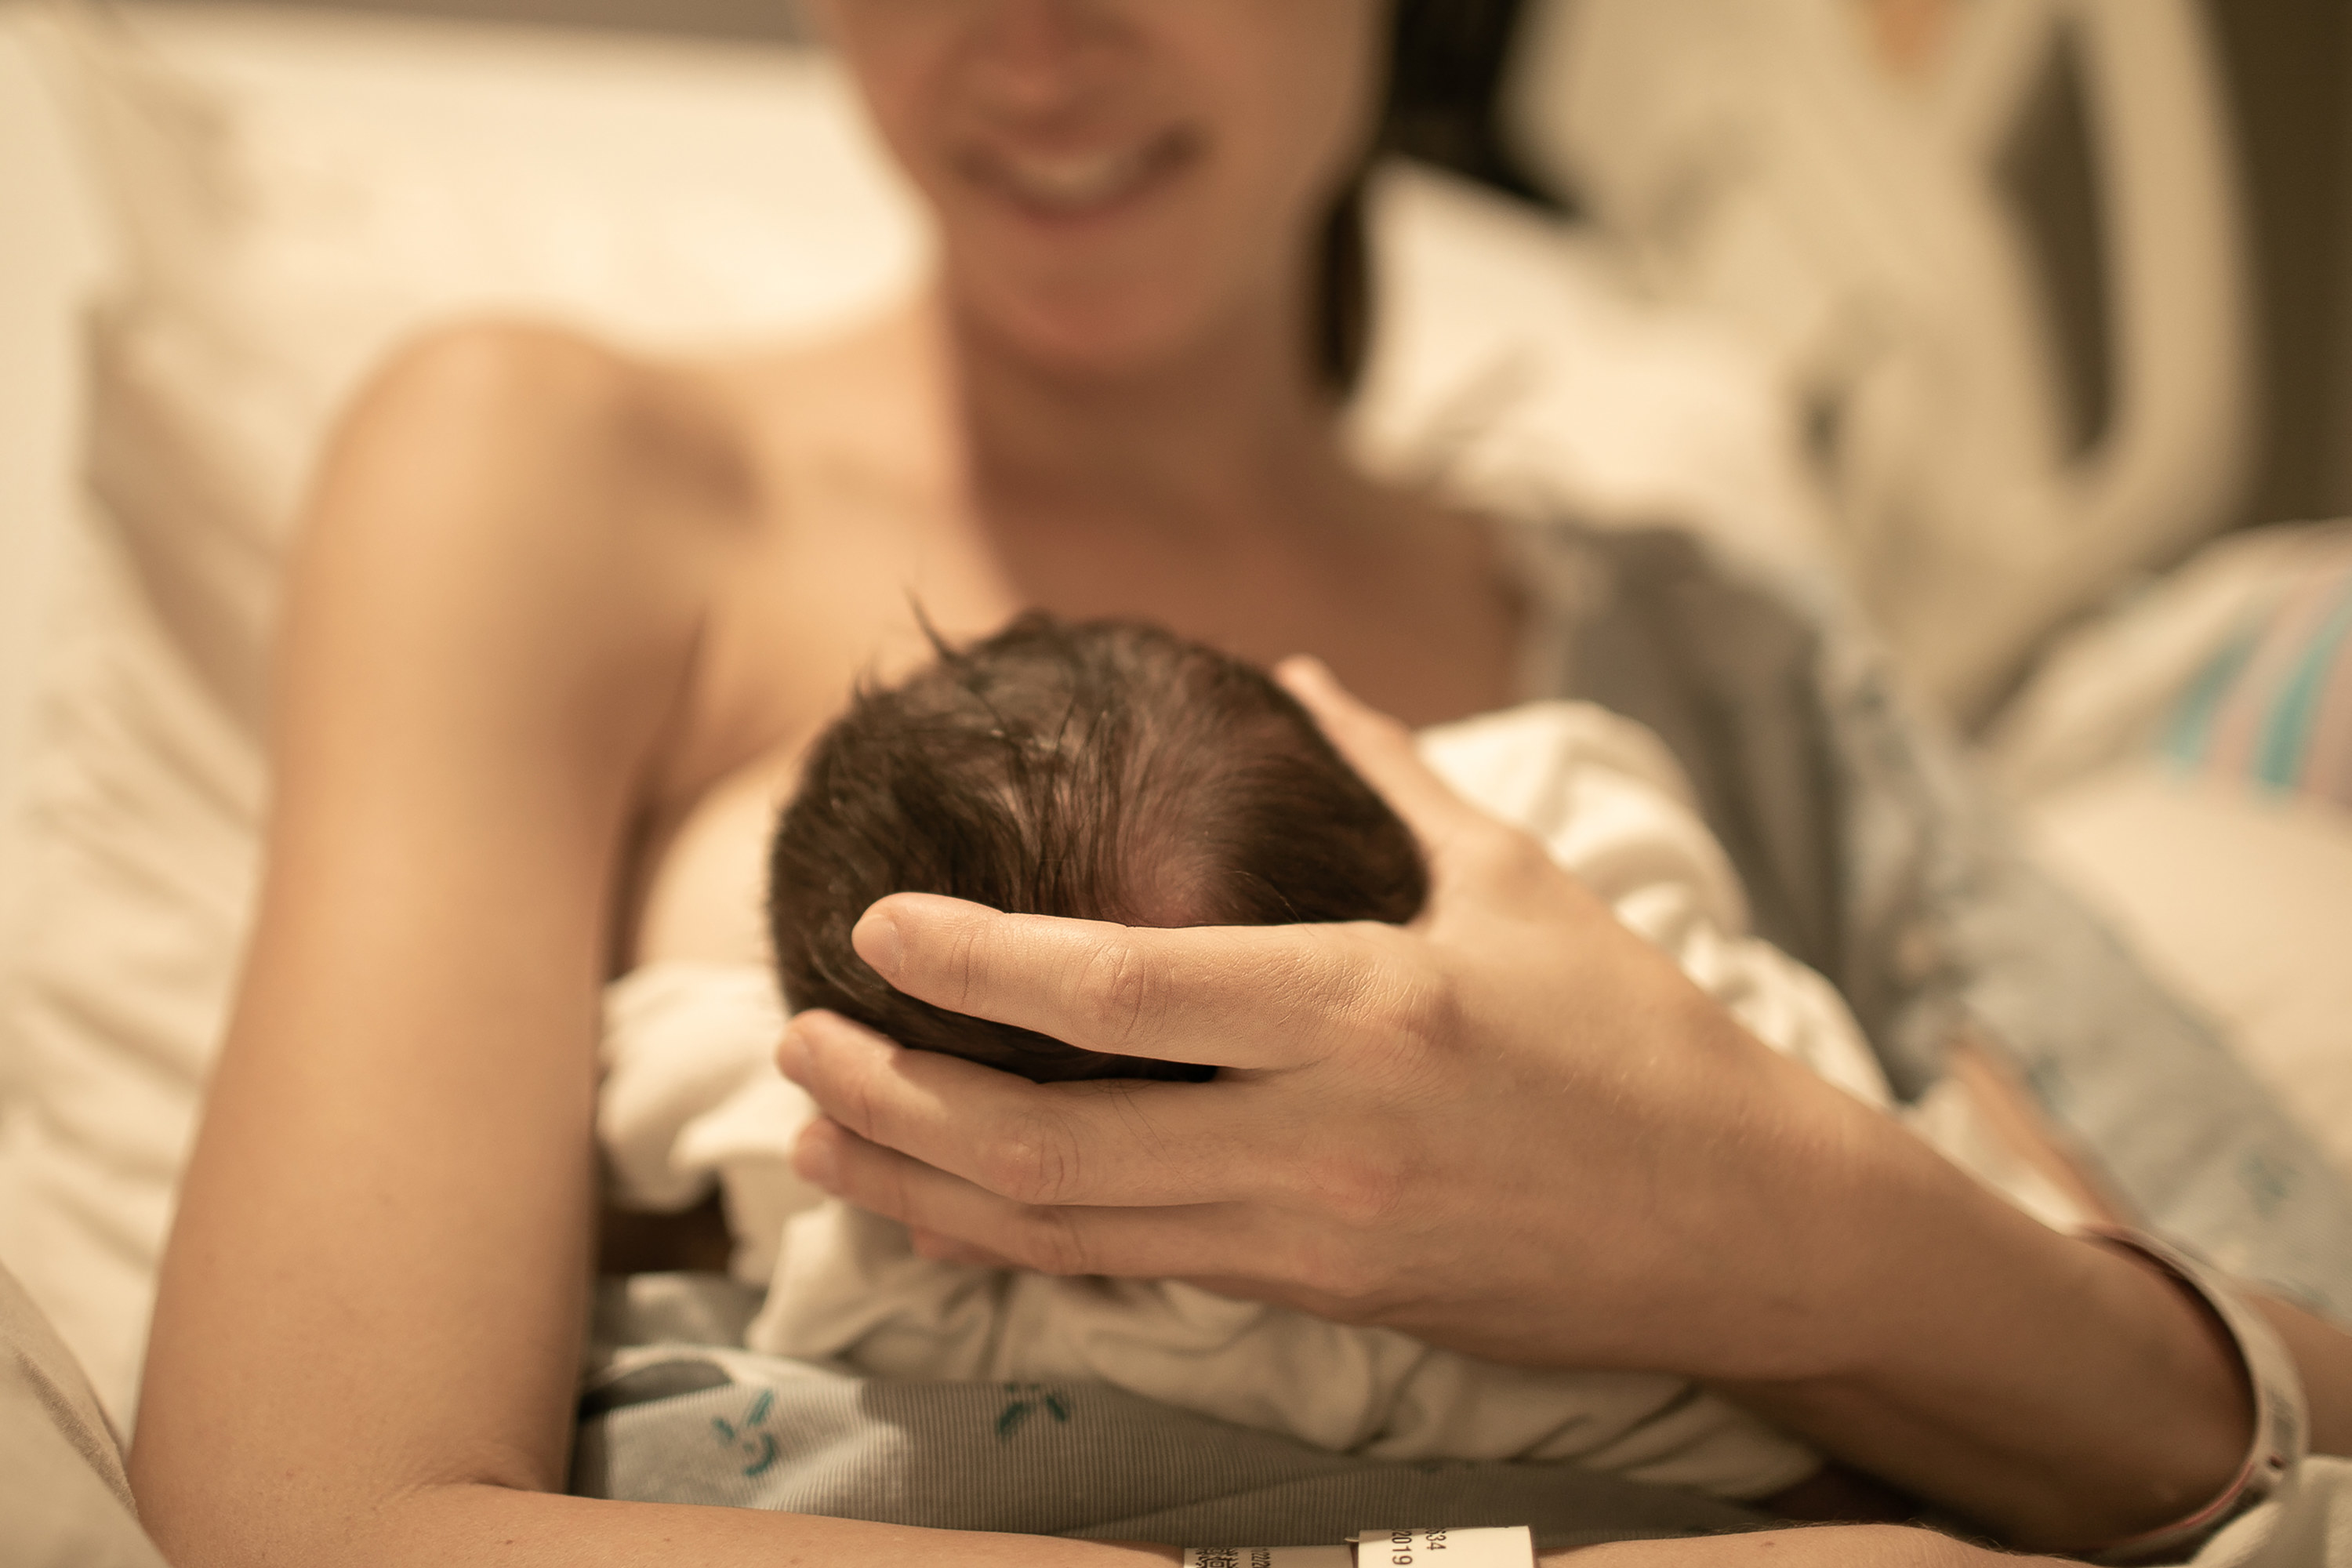 A mother holding a newborn in her hands in the hospital